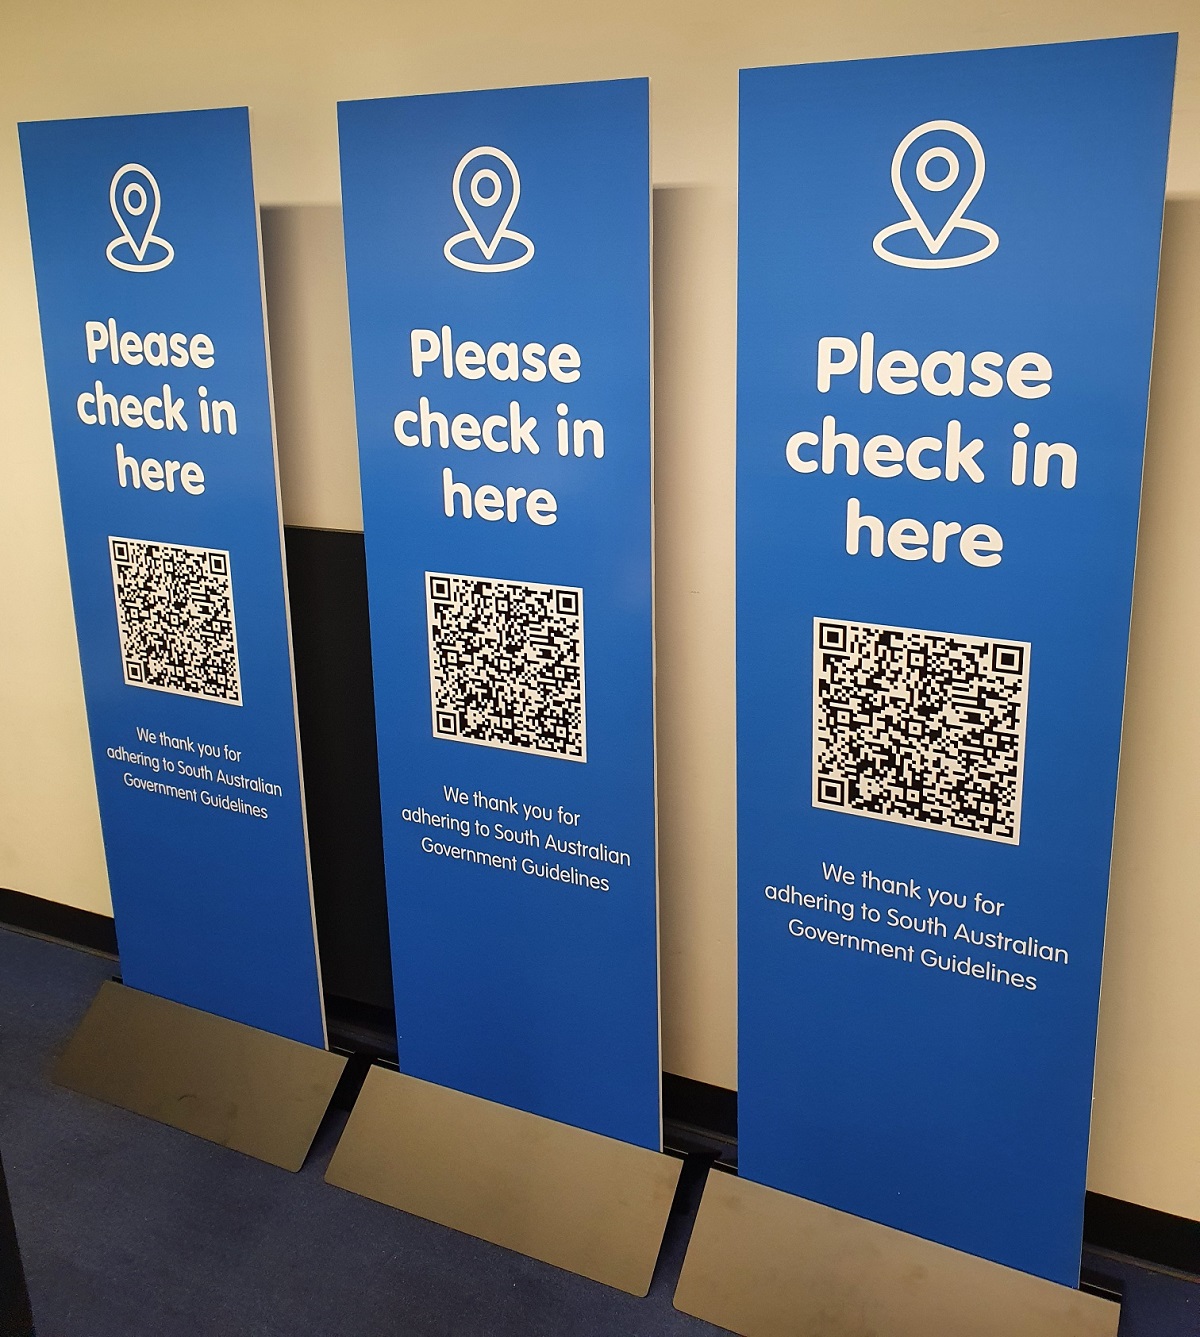 Signs for COVID check-in